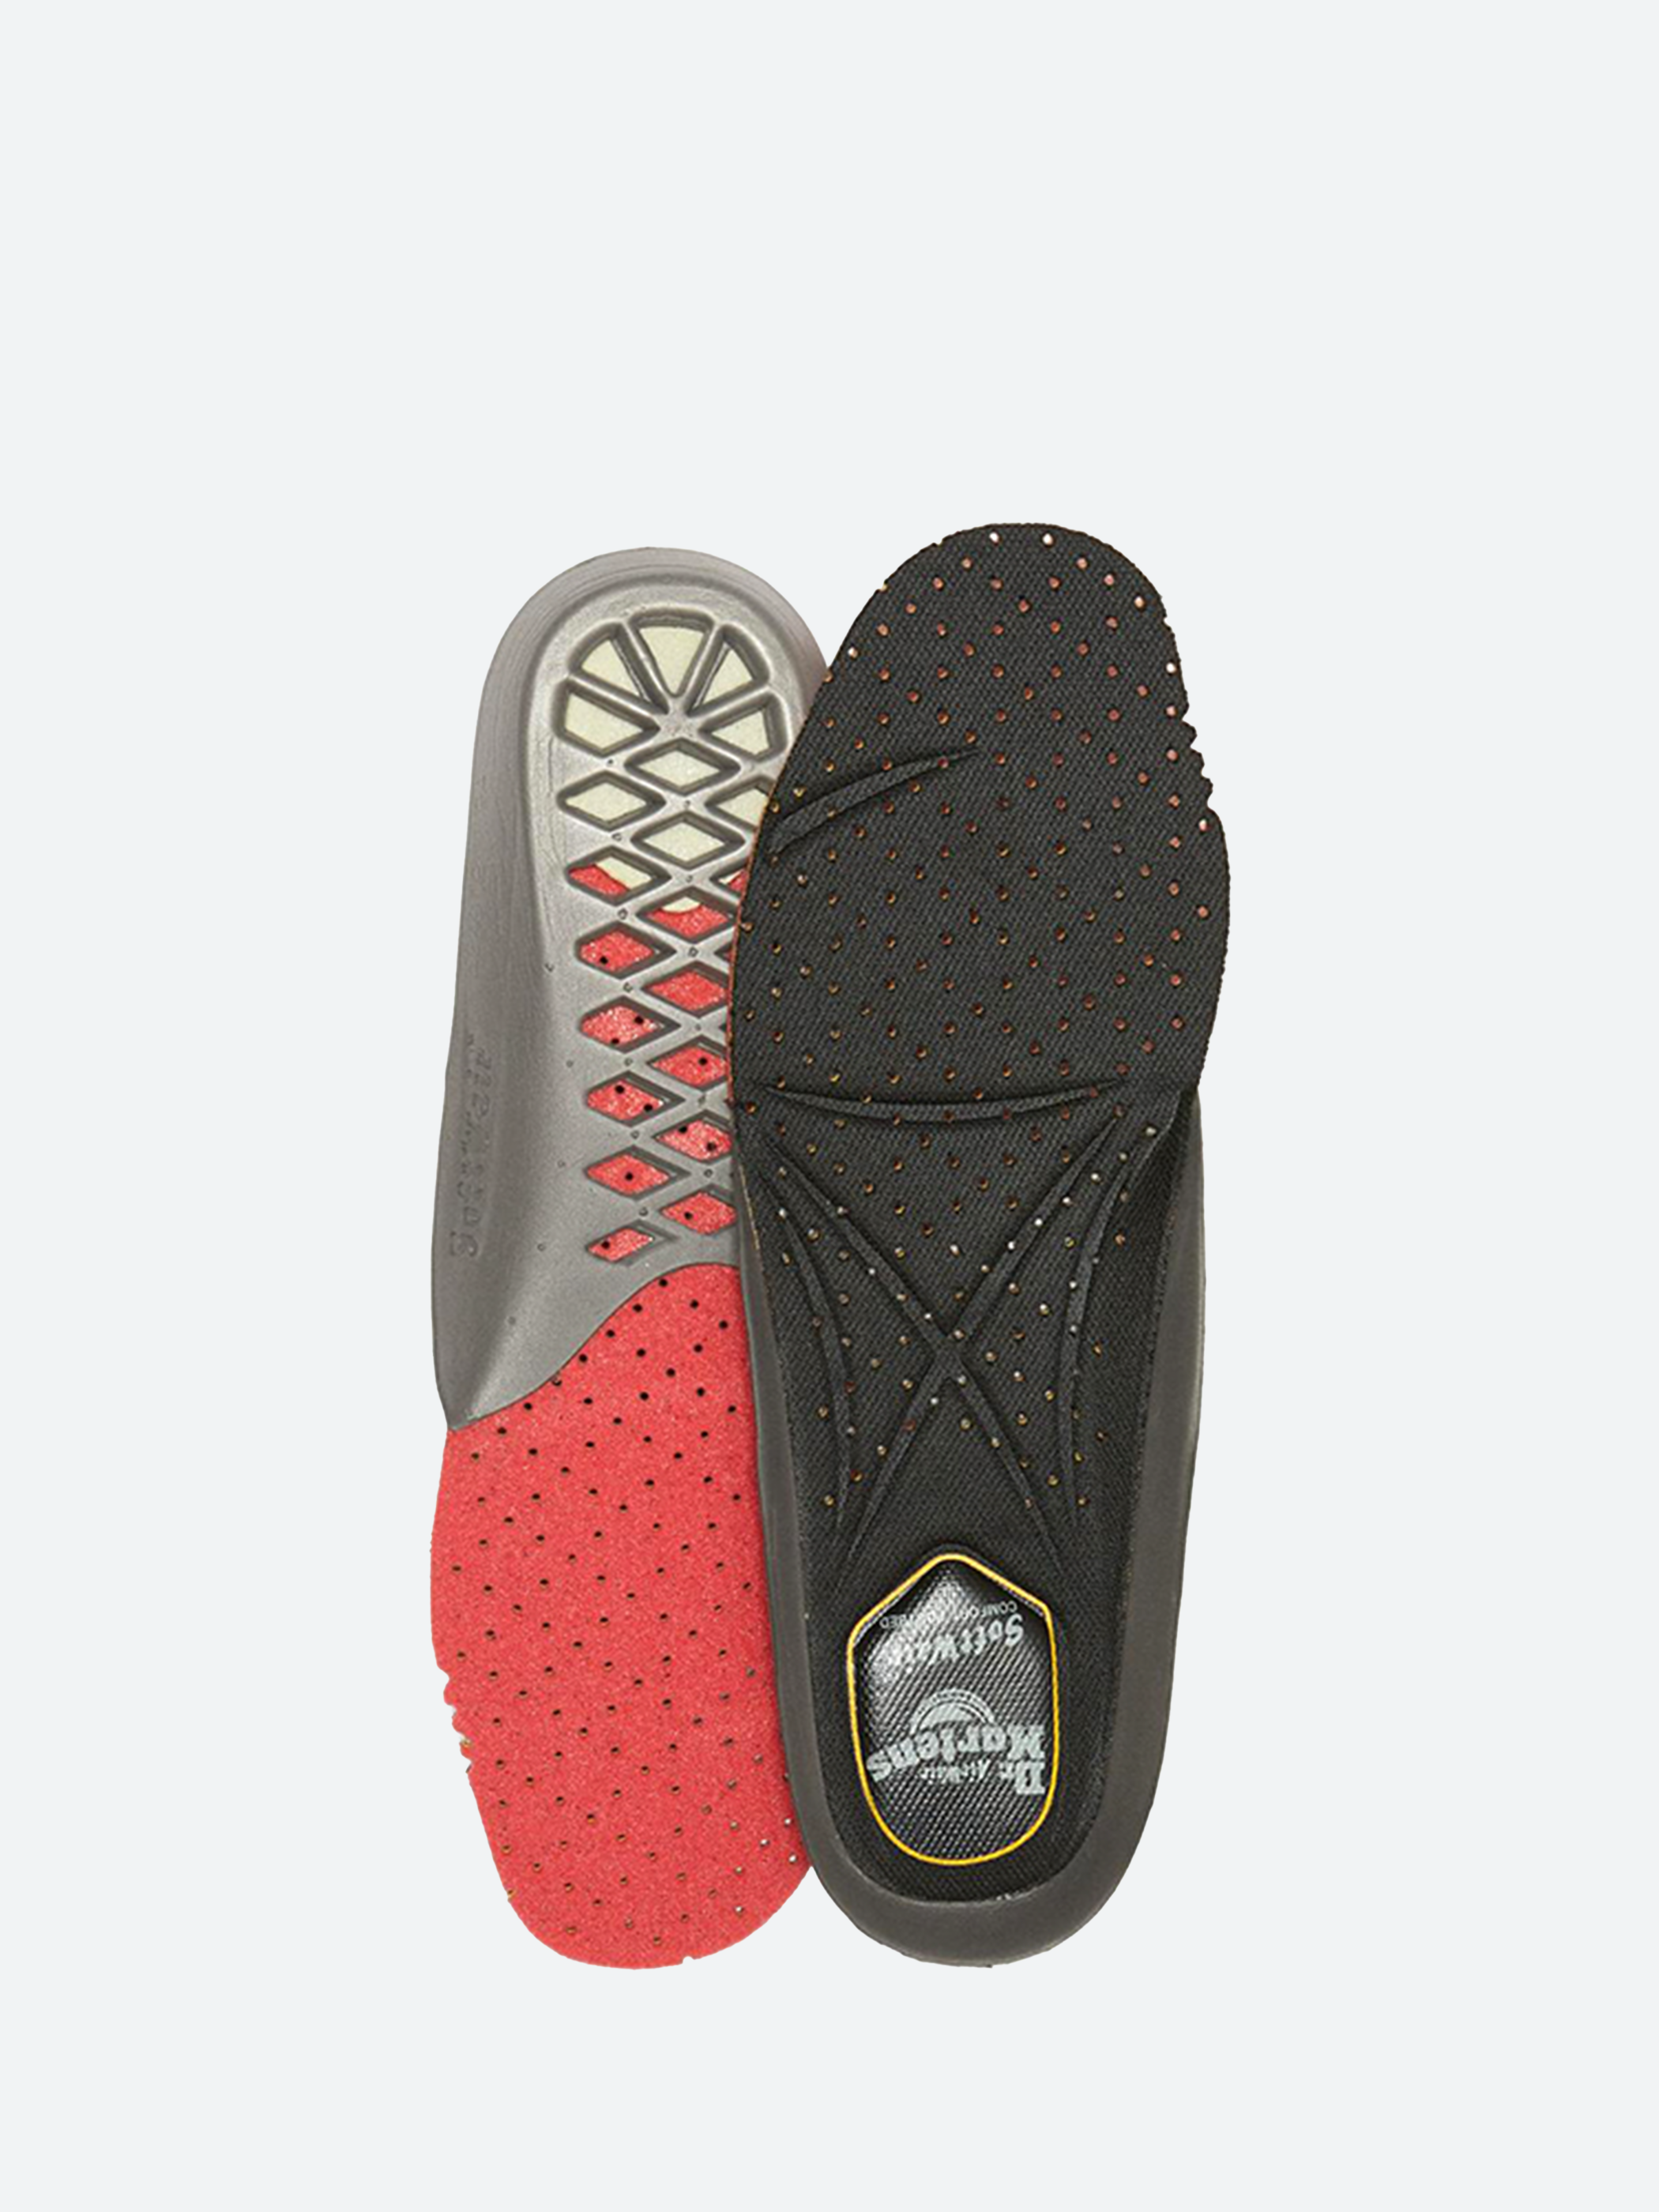 Softwair Insole